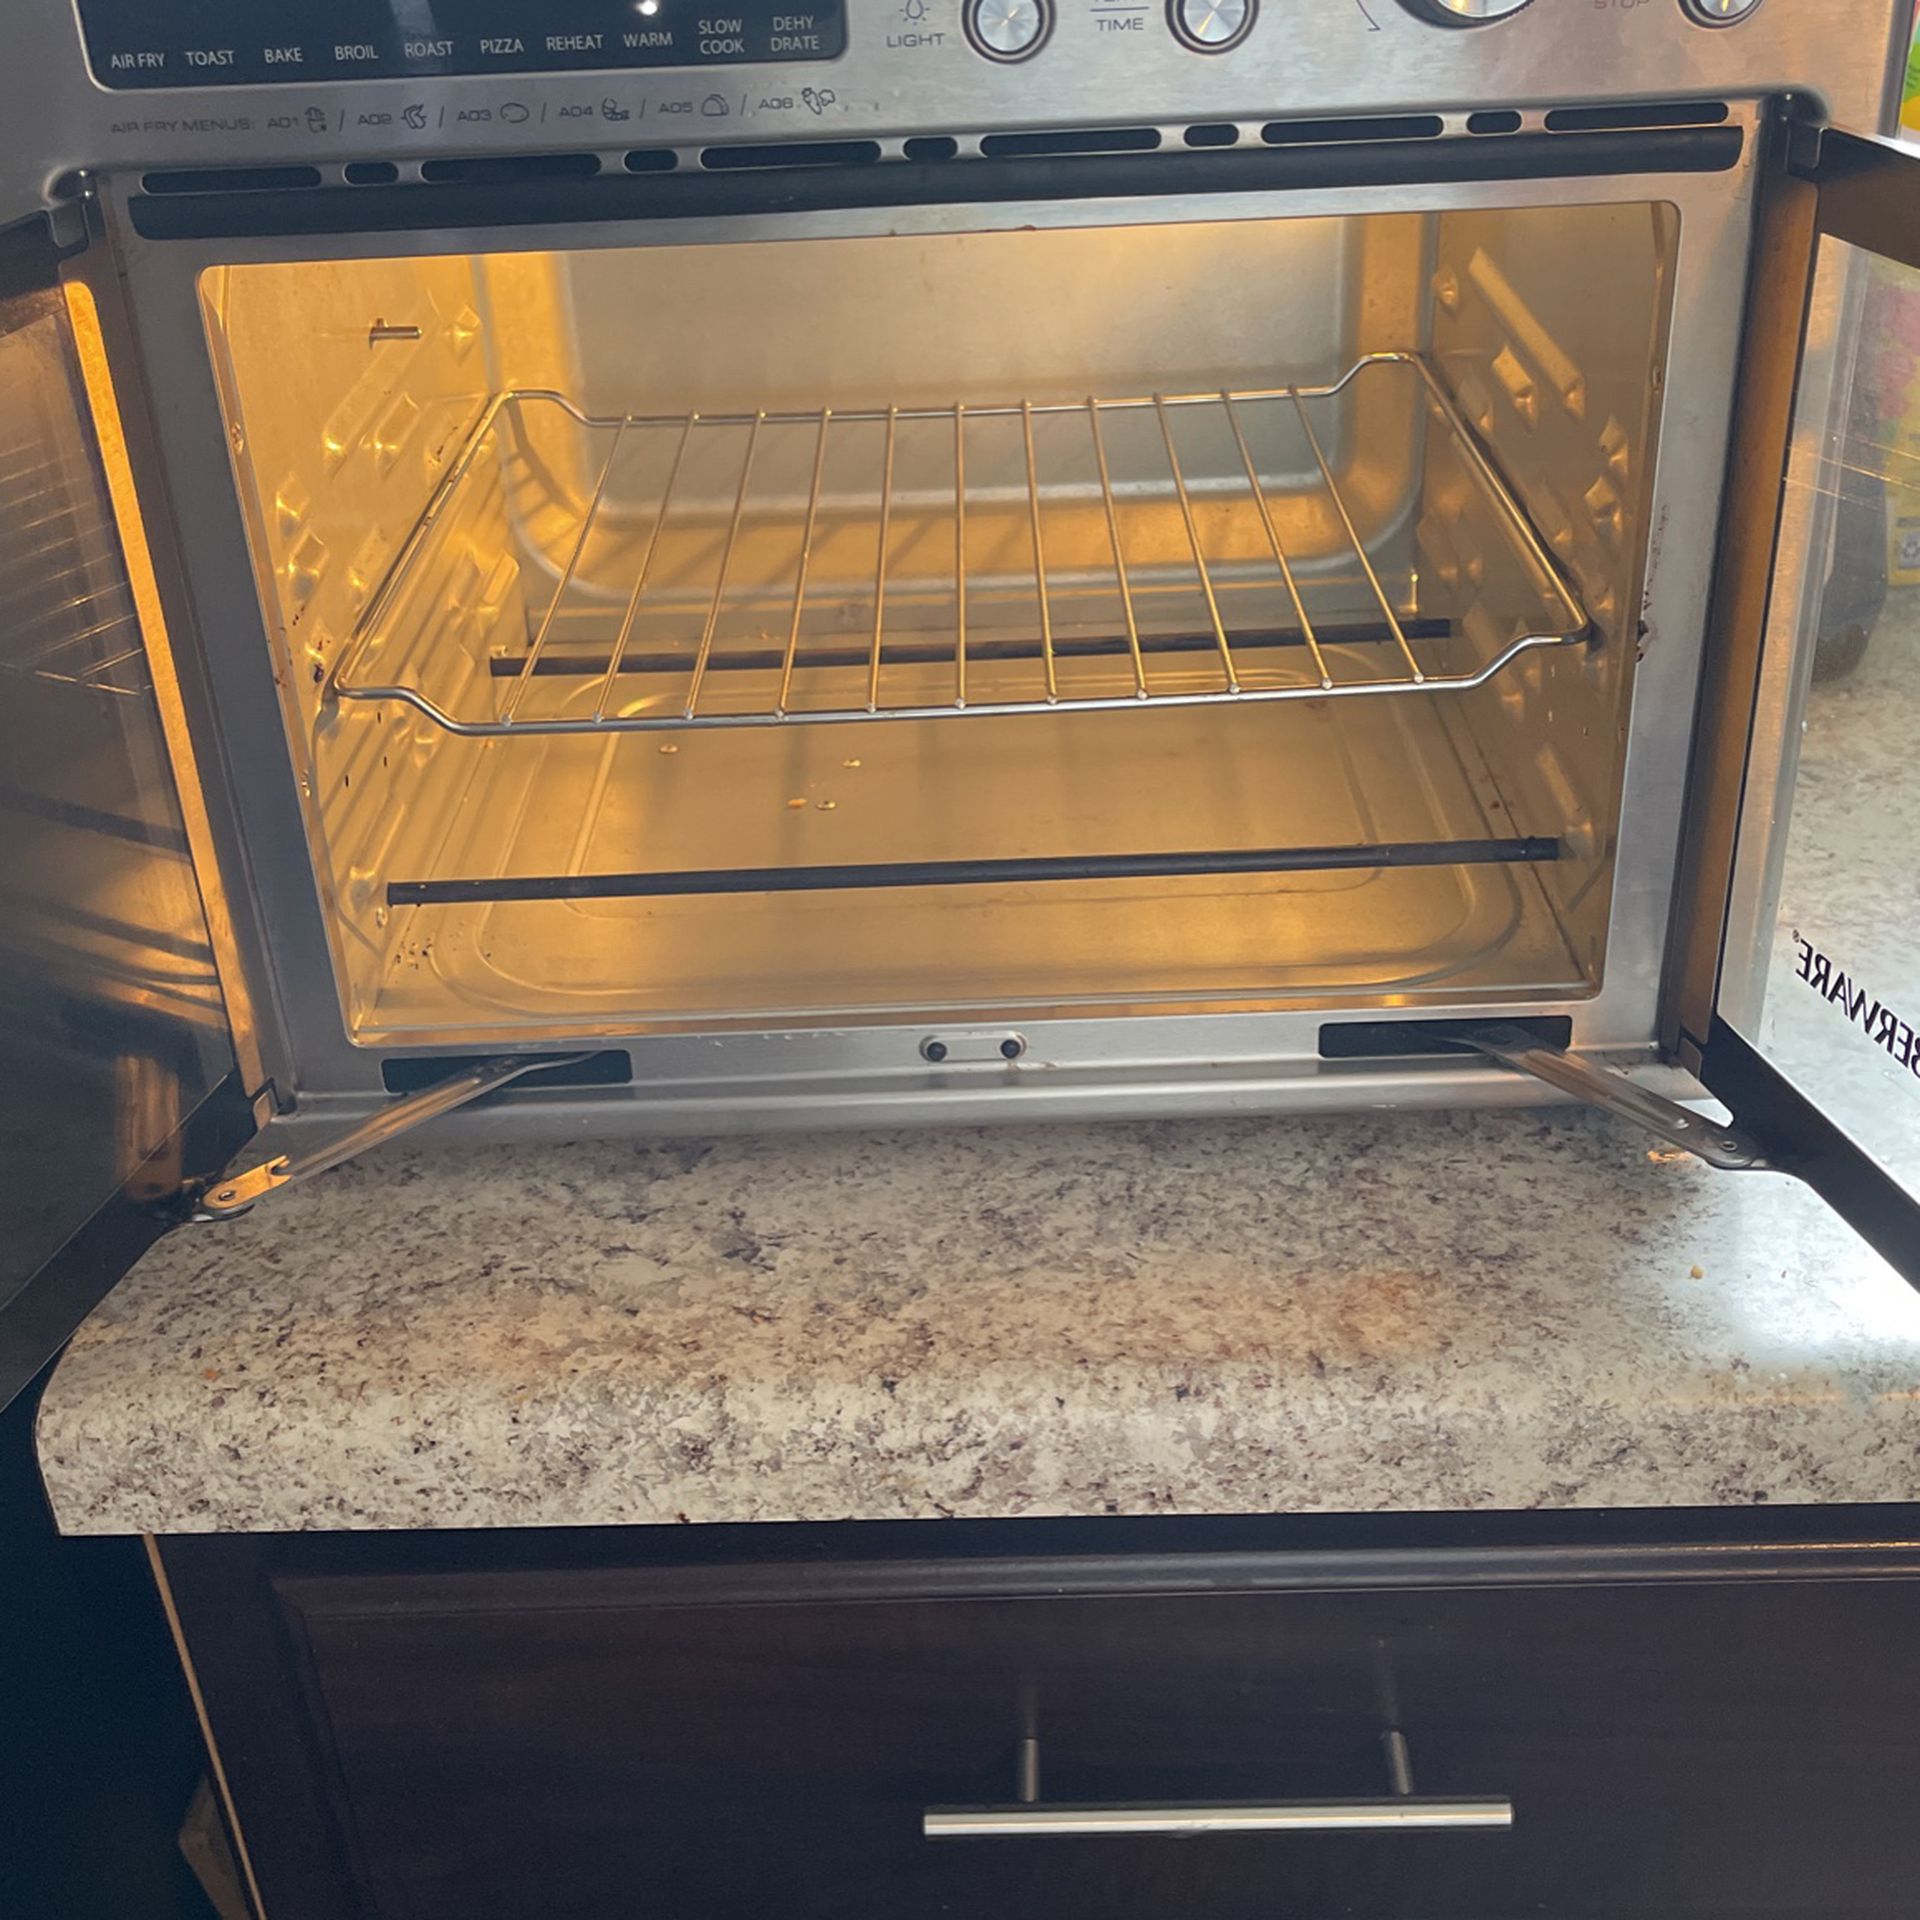 Farberware Air Fryer Toaster Oven for Sale in Sunland Park, NM